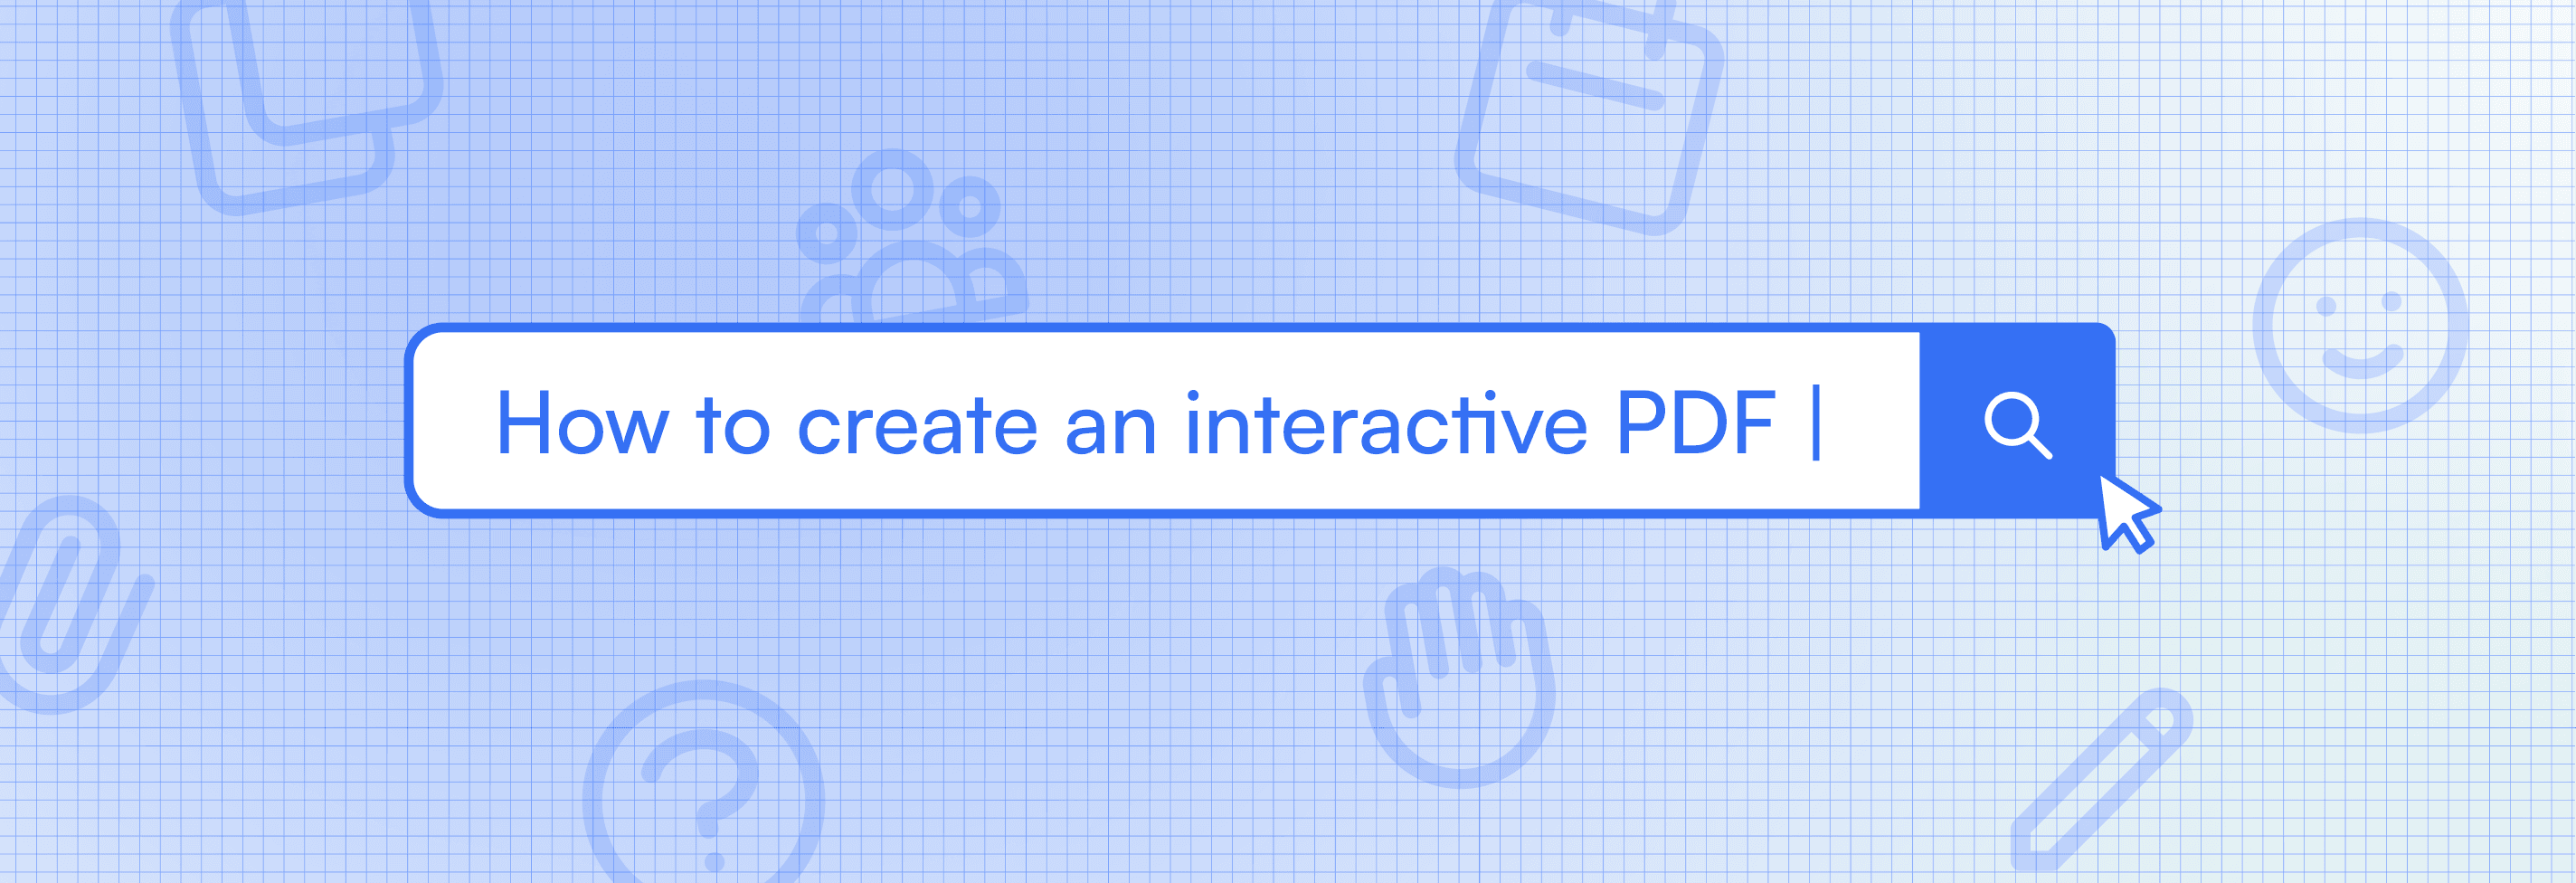 How to create an interactive PDF